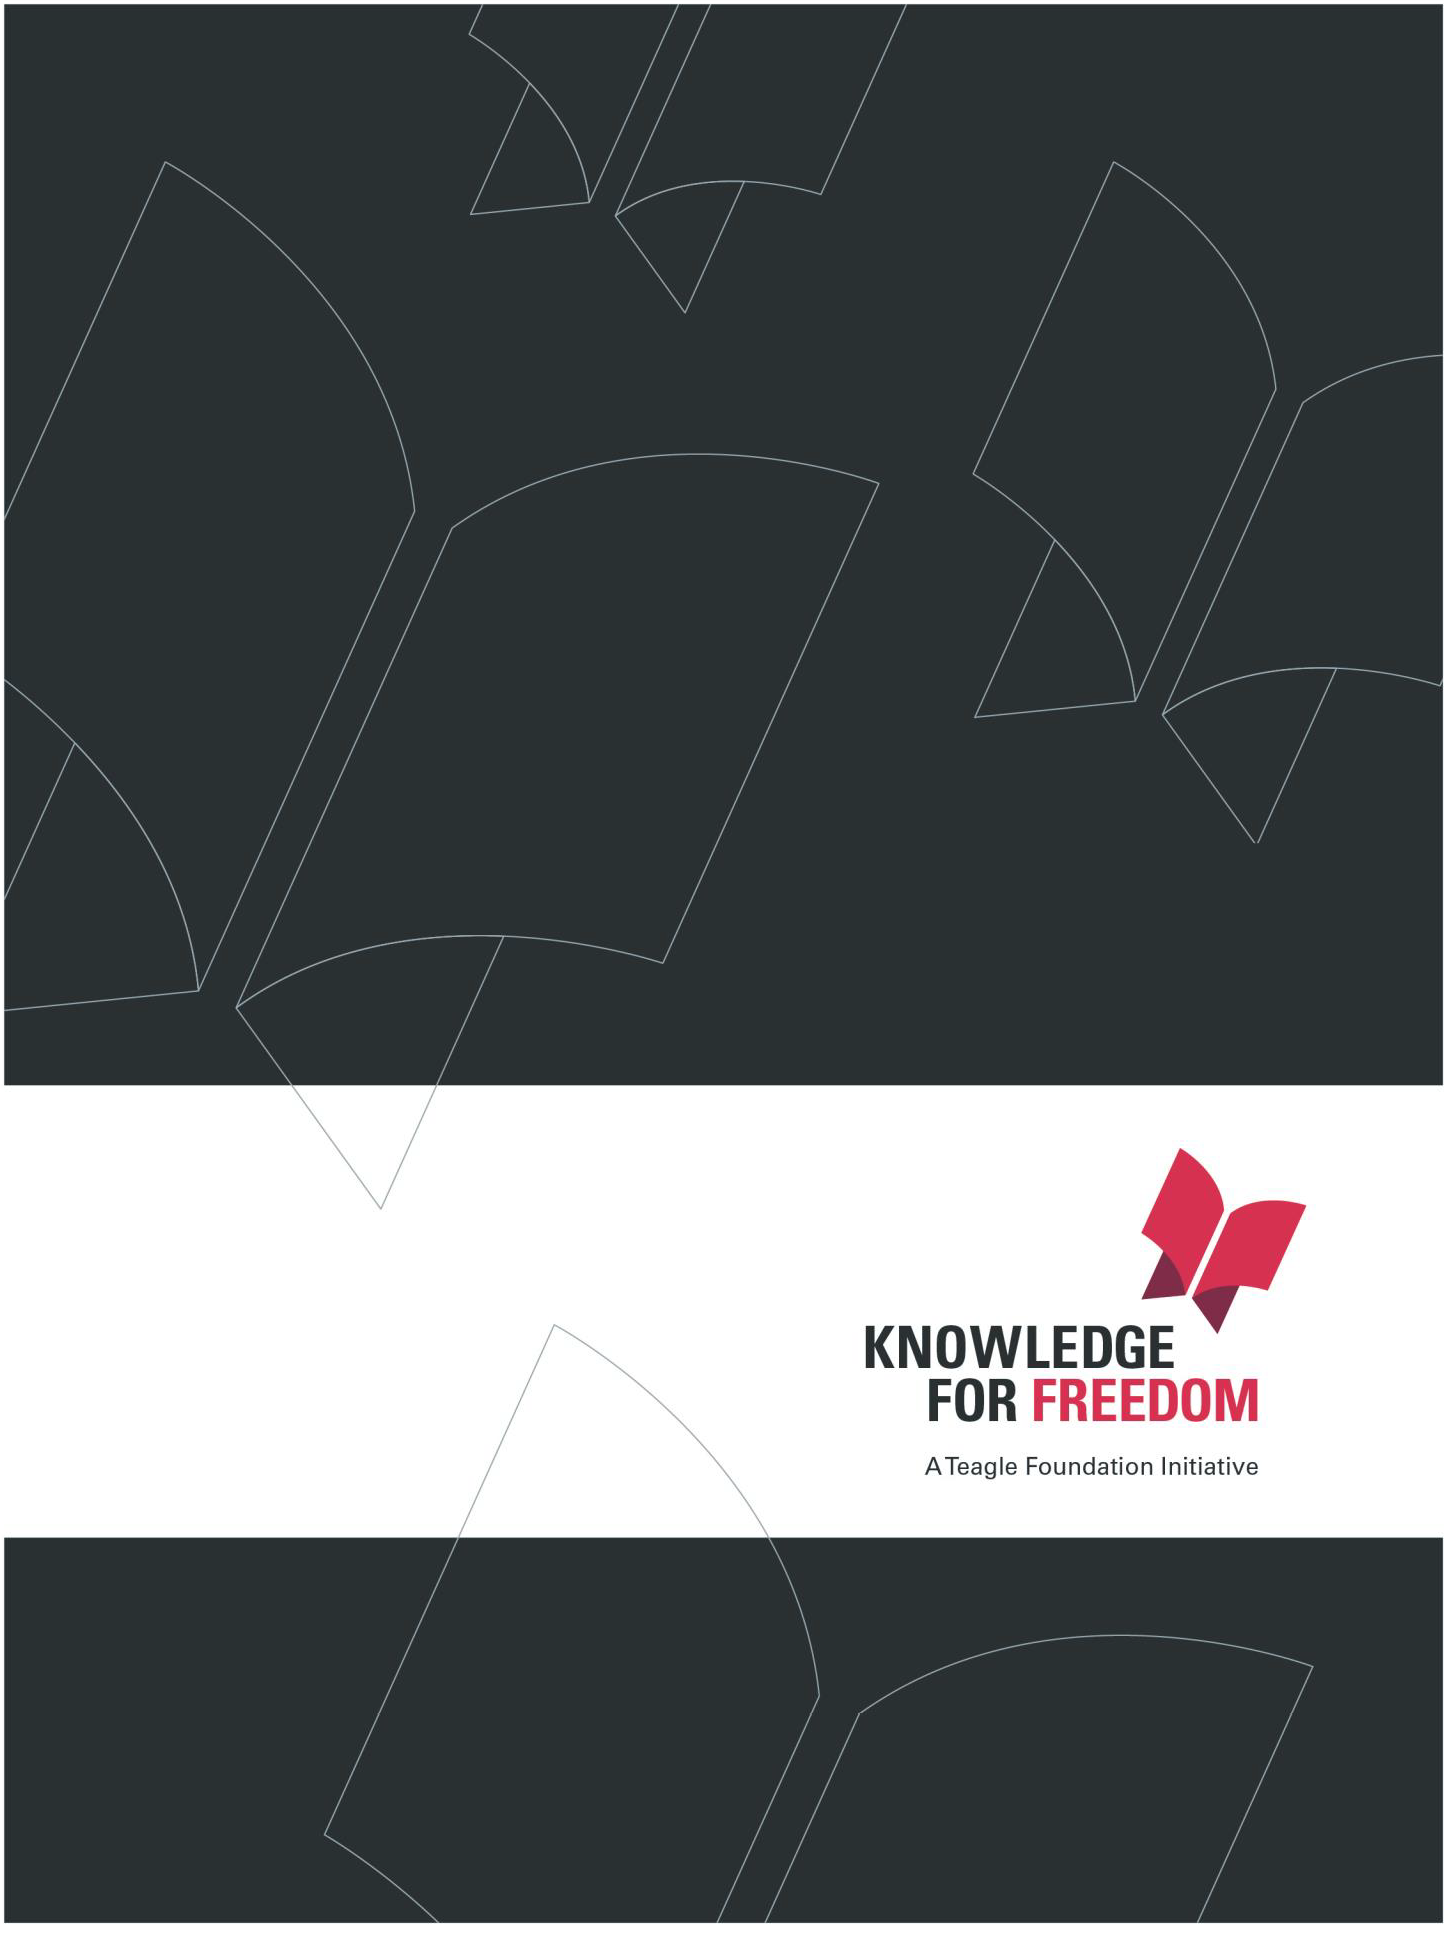 Toolkit for Knowledge for Freedom